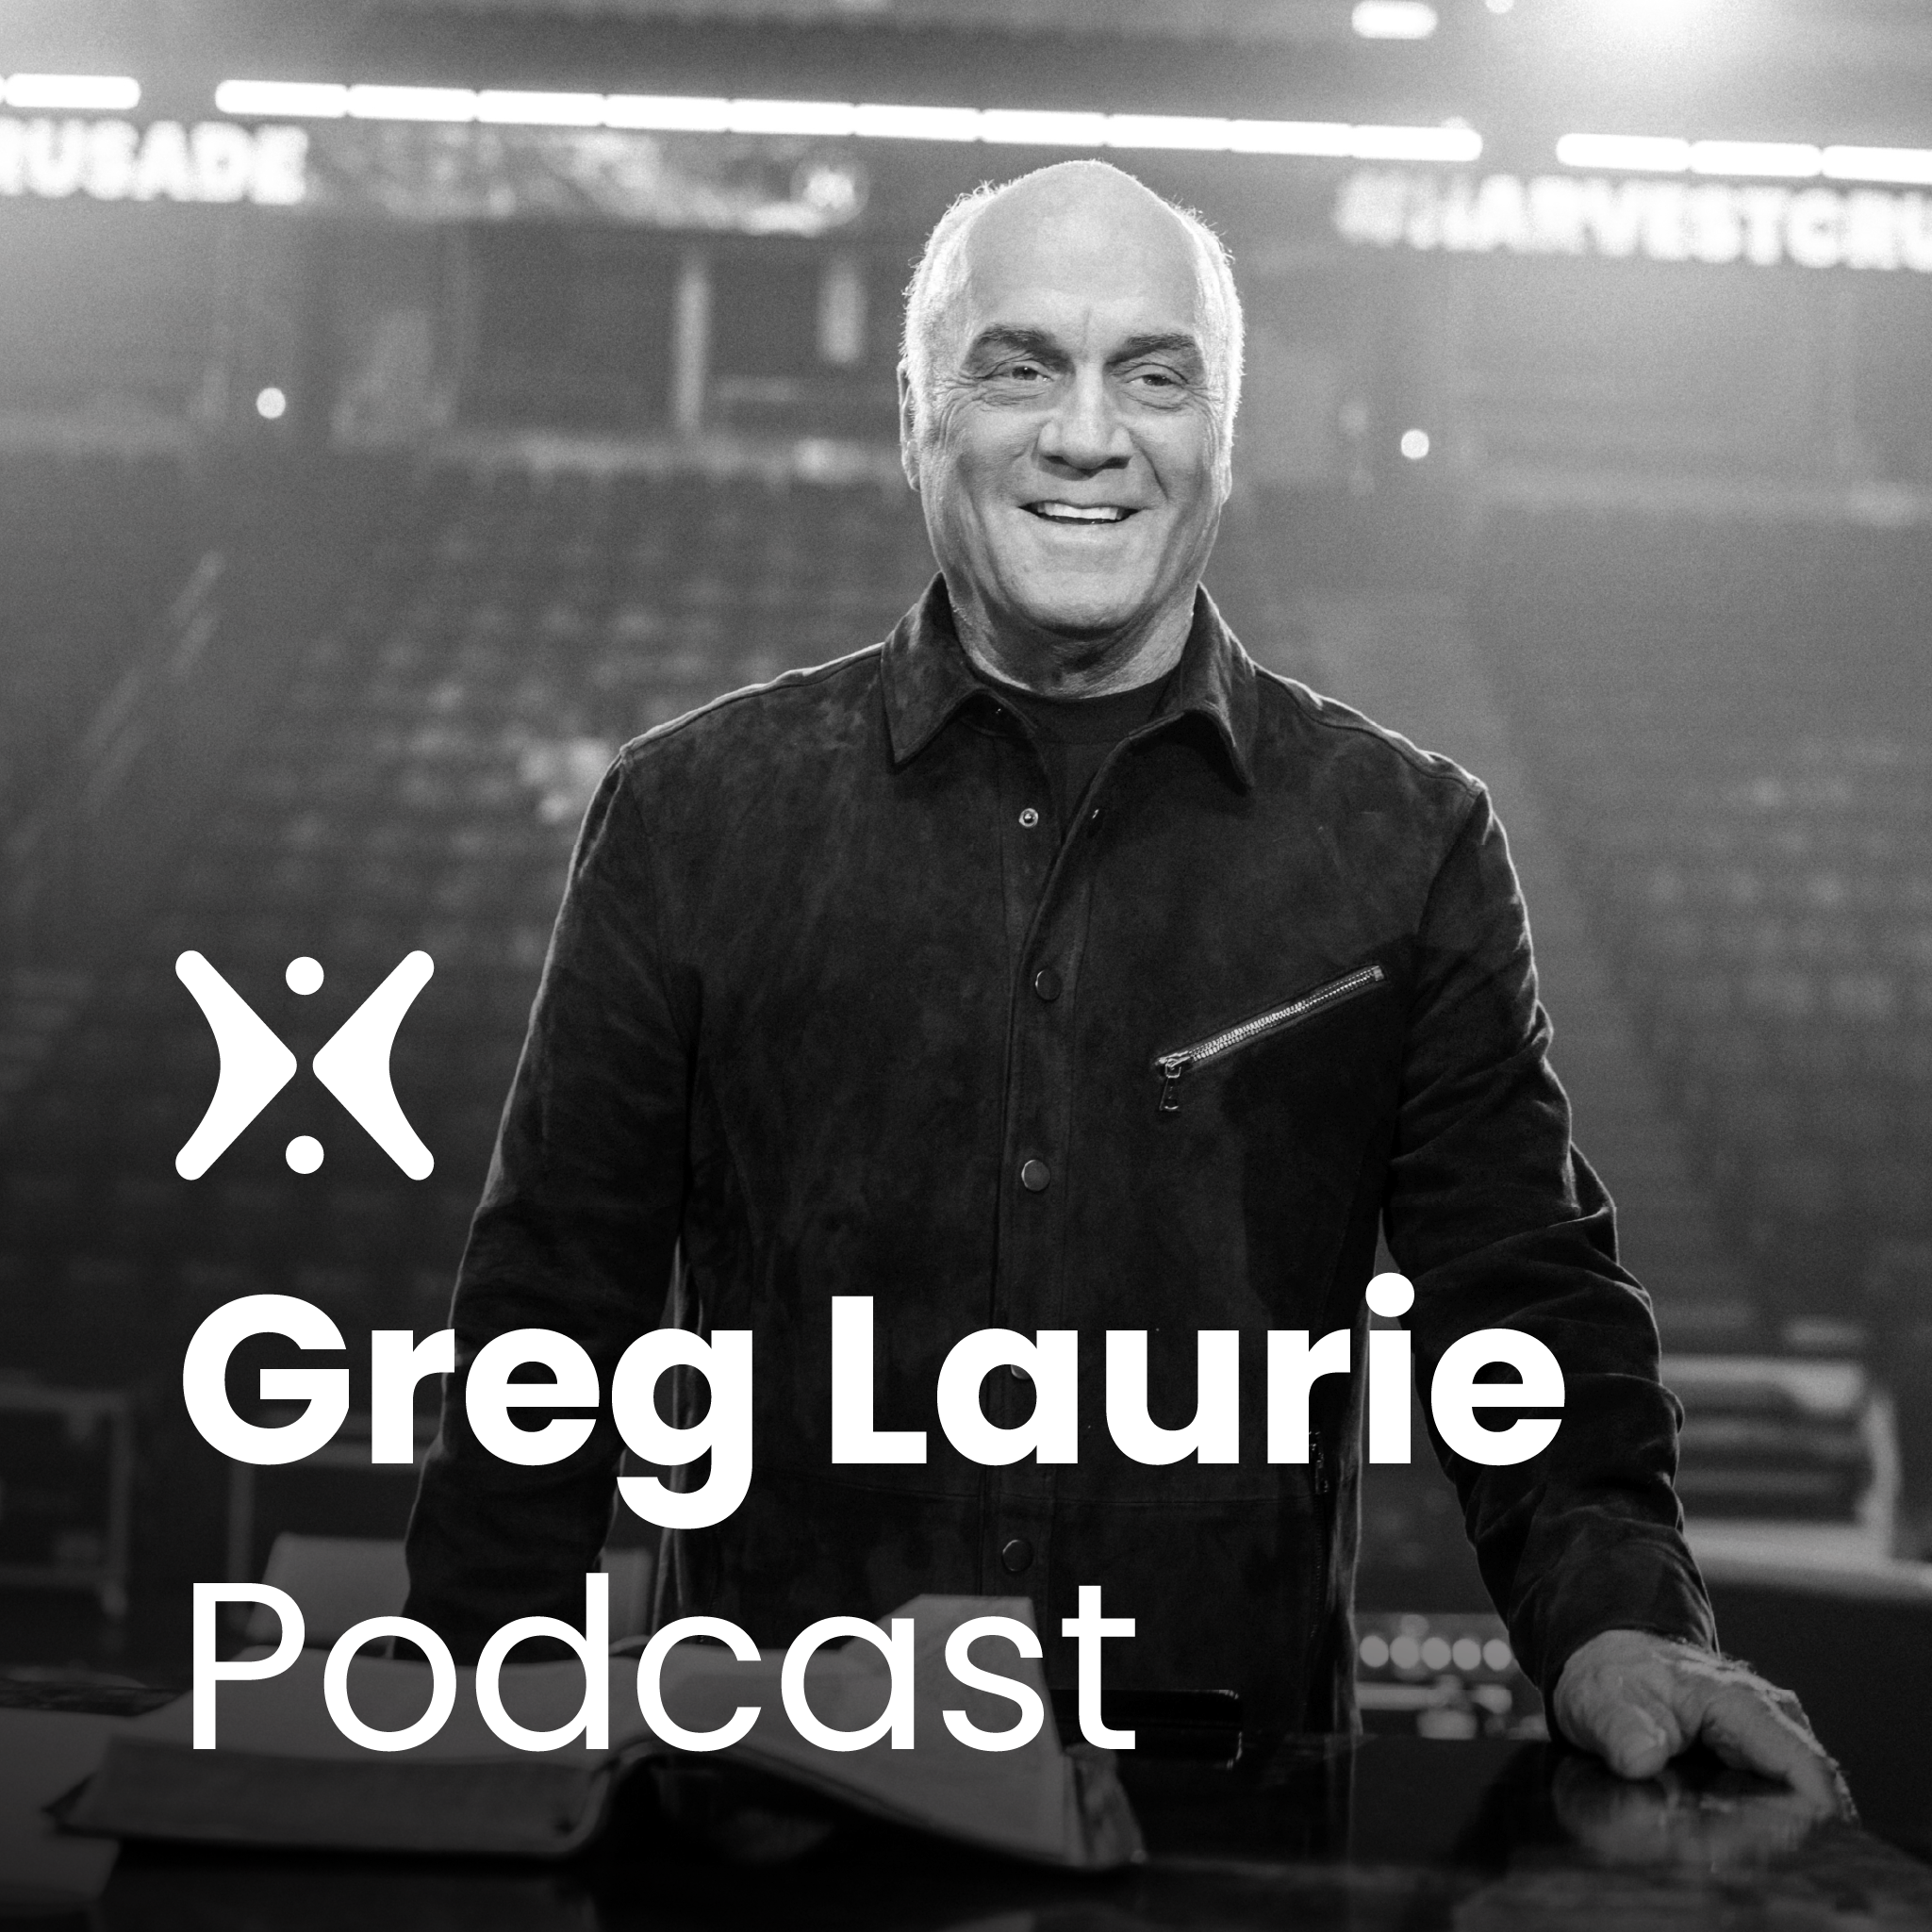 From the Archives: Hugh Hewitt Interviews Greg Laurie